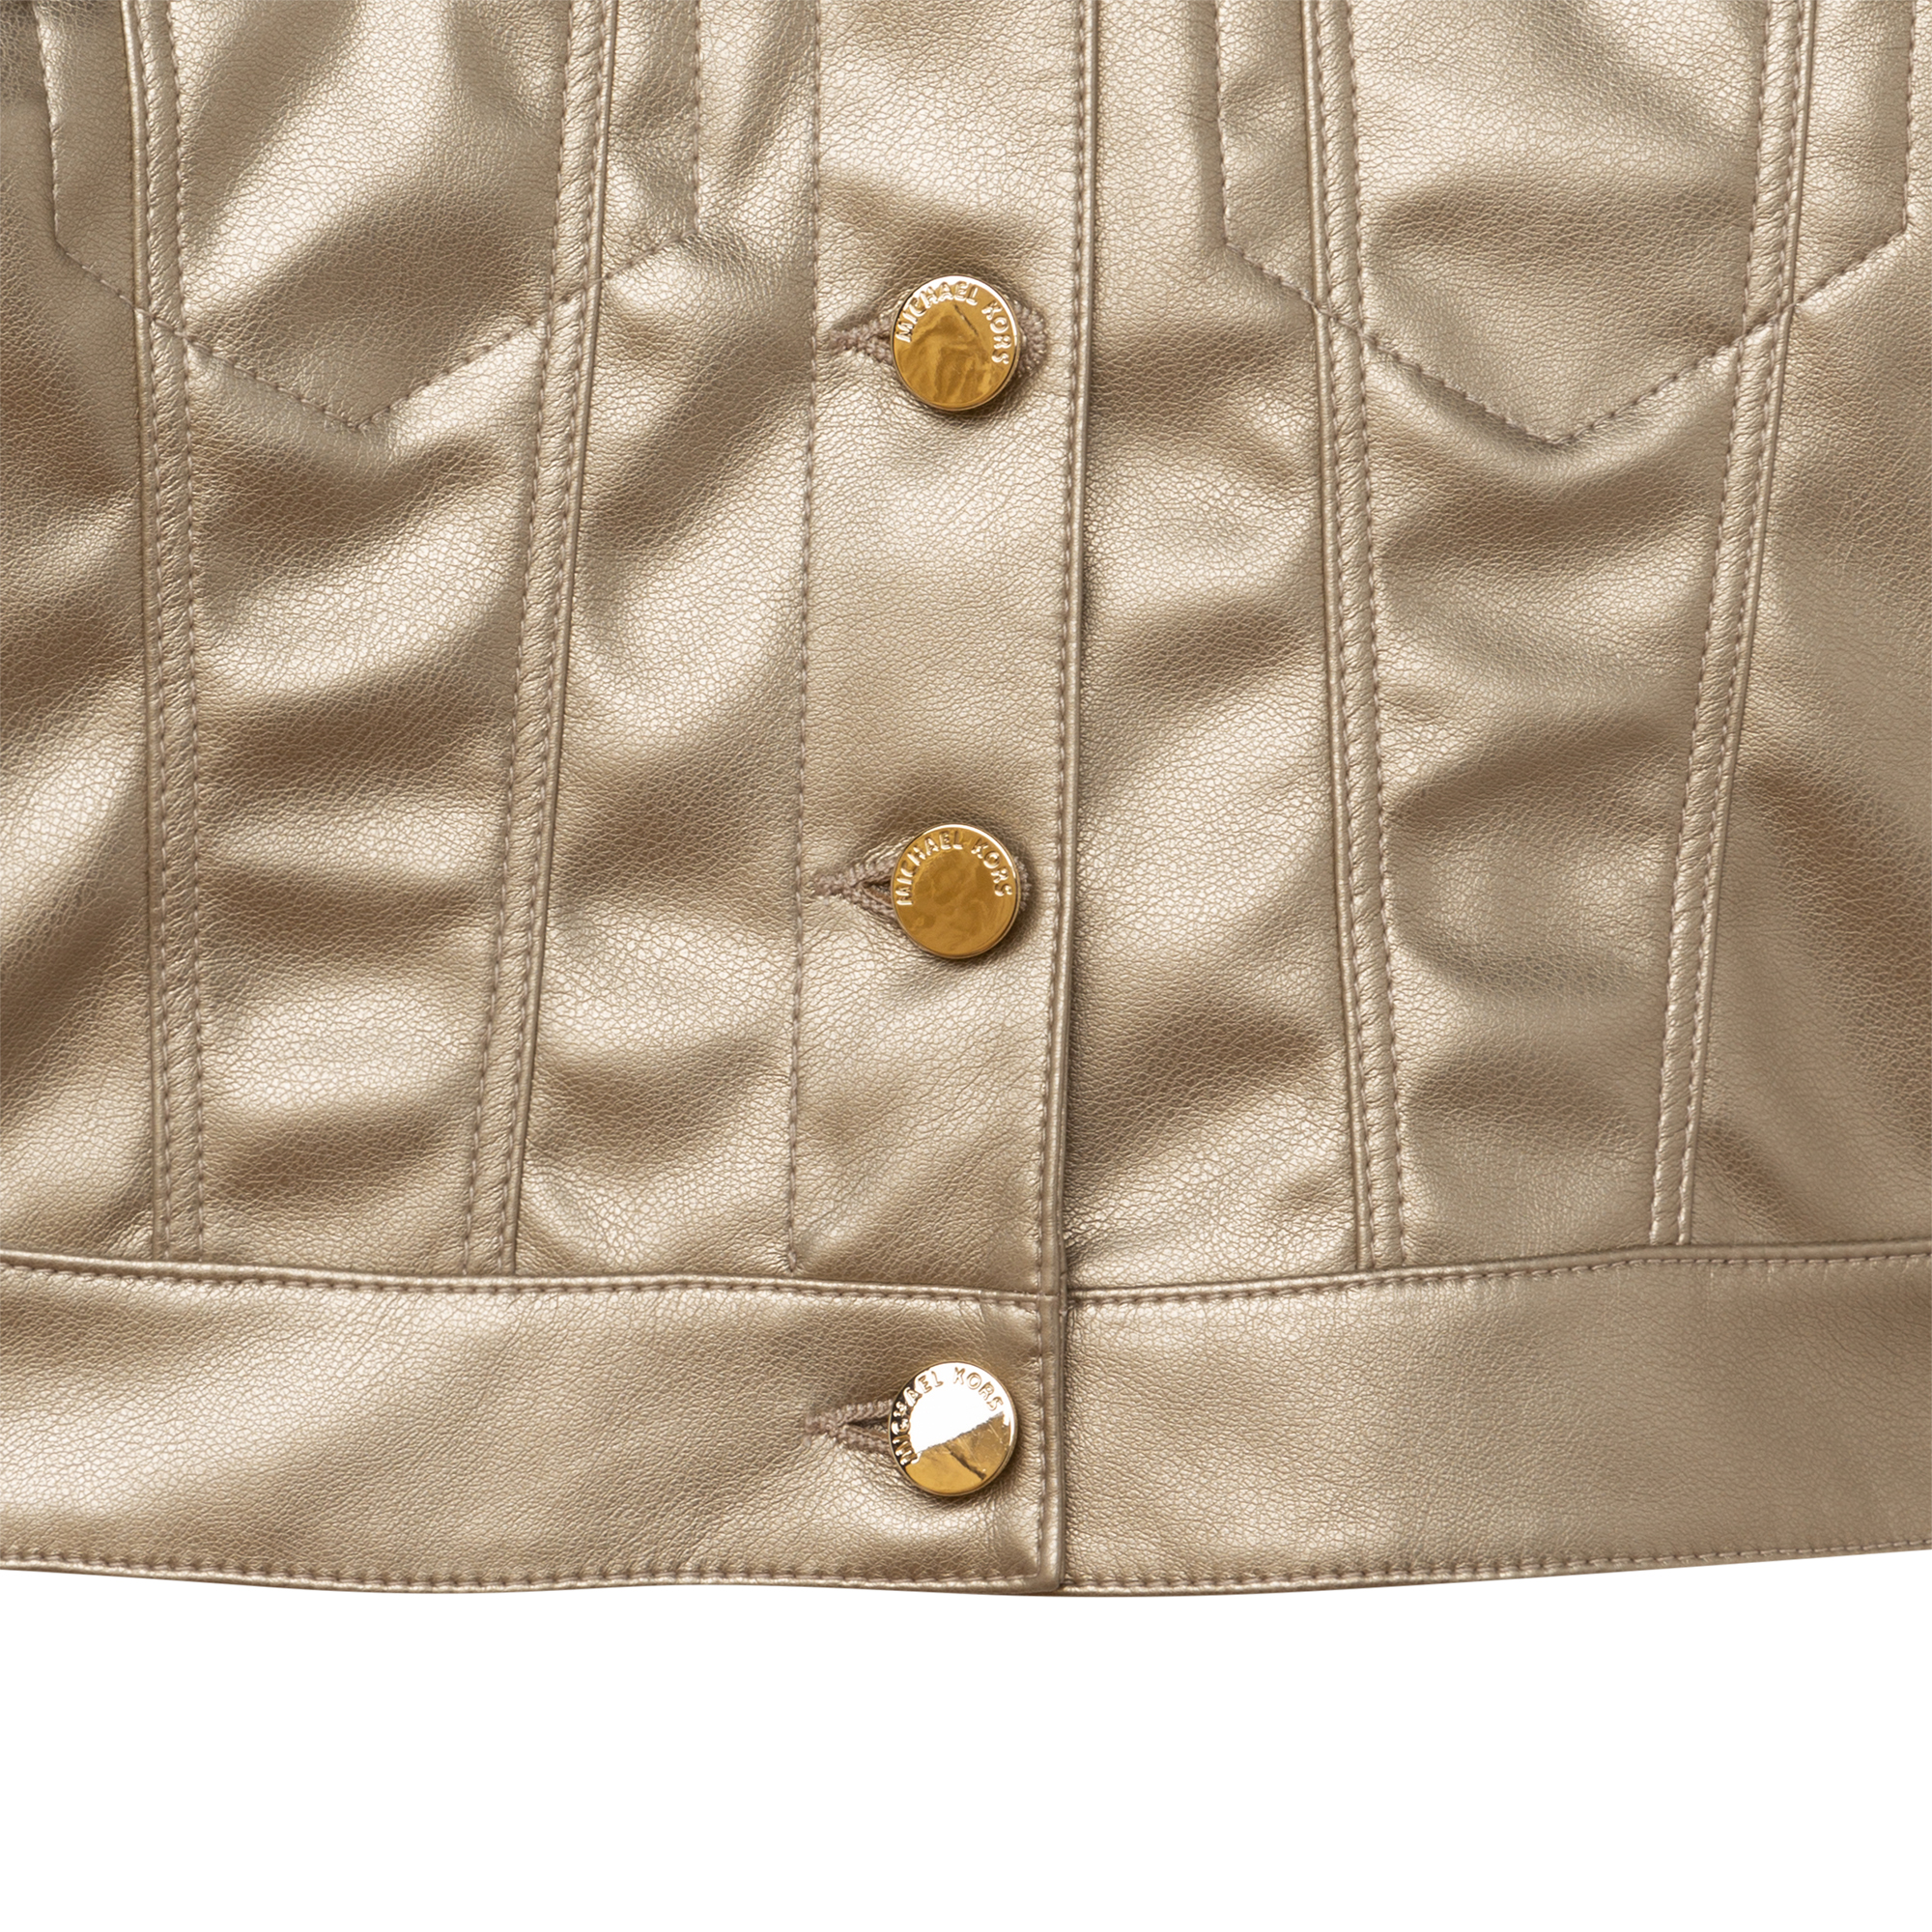 Buttoned jacket with pockets MICHAEL KORS for GIRL